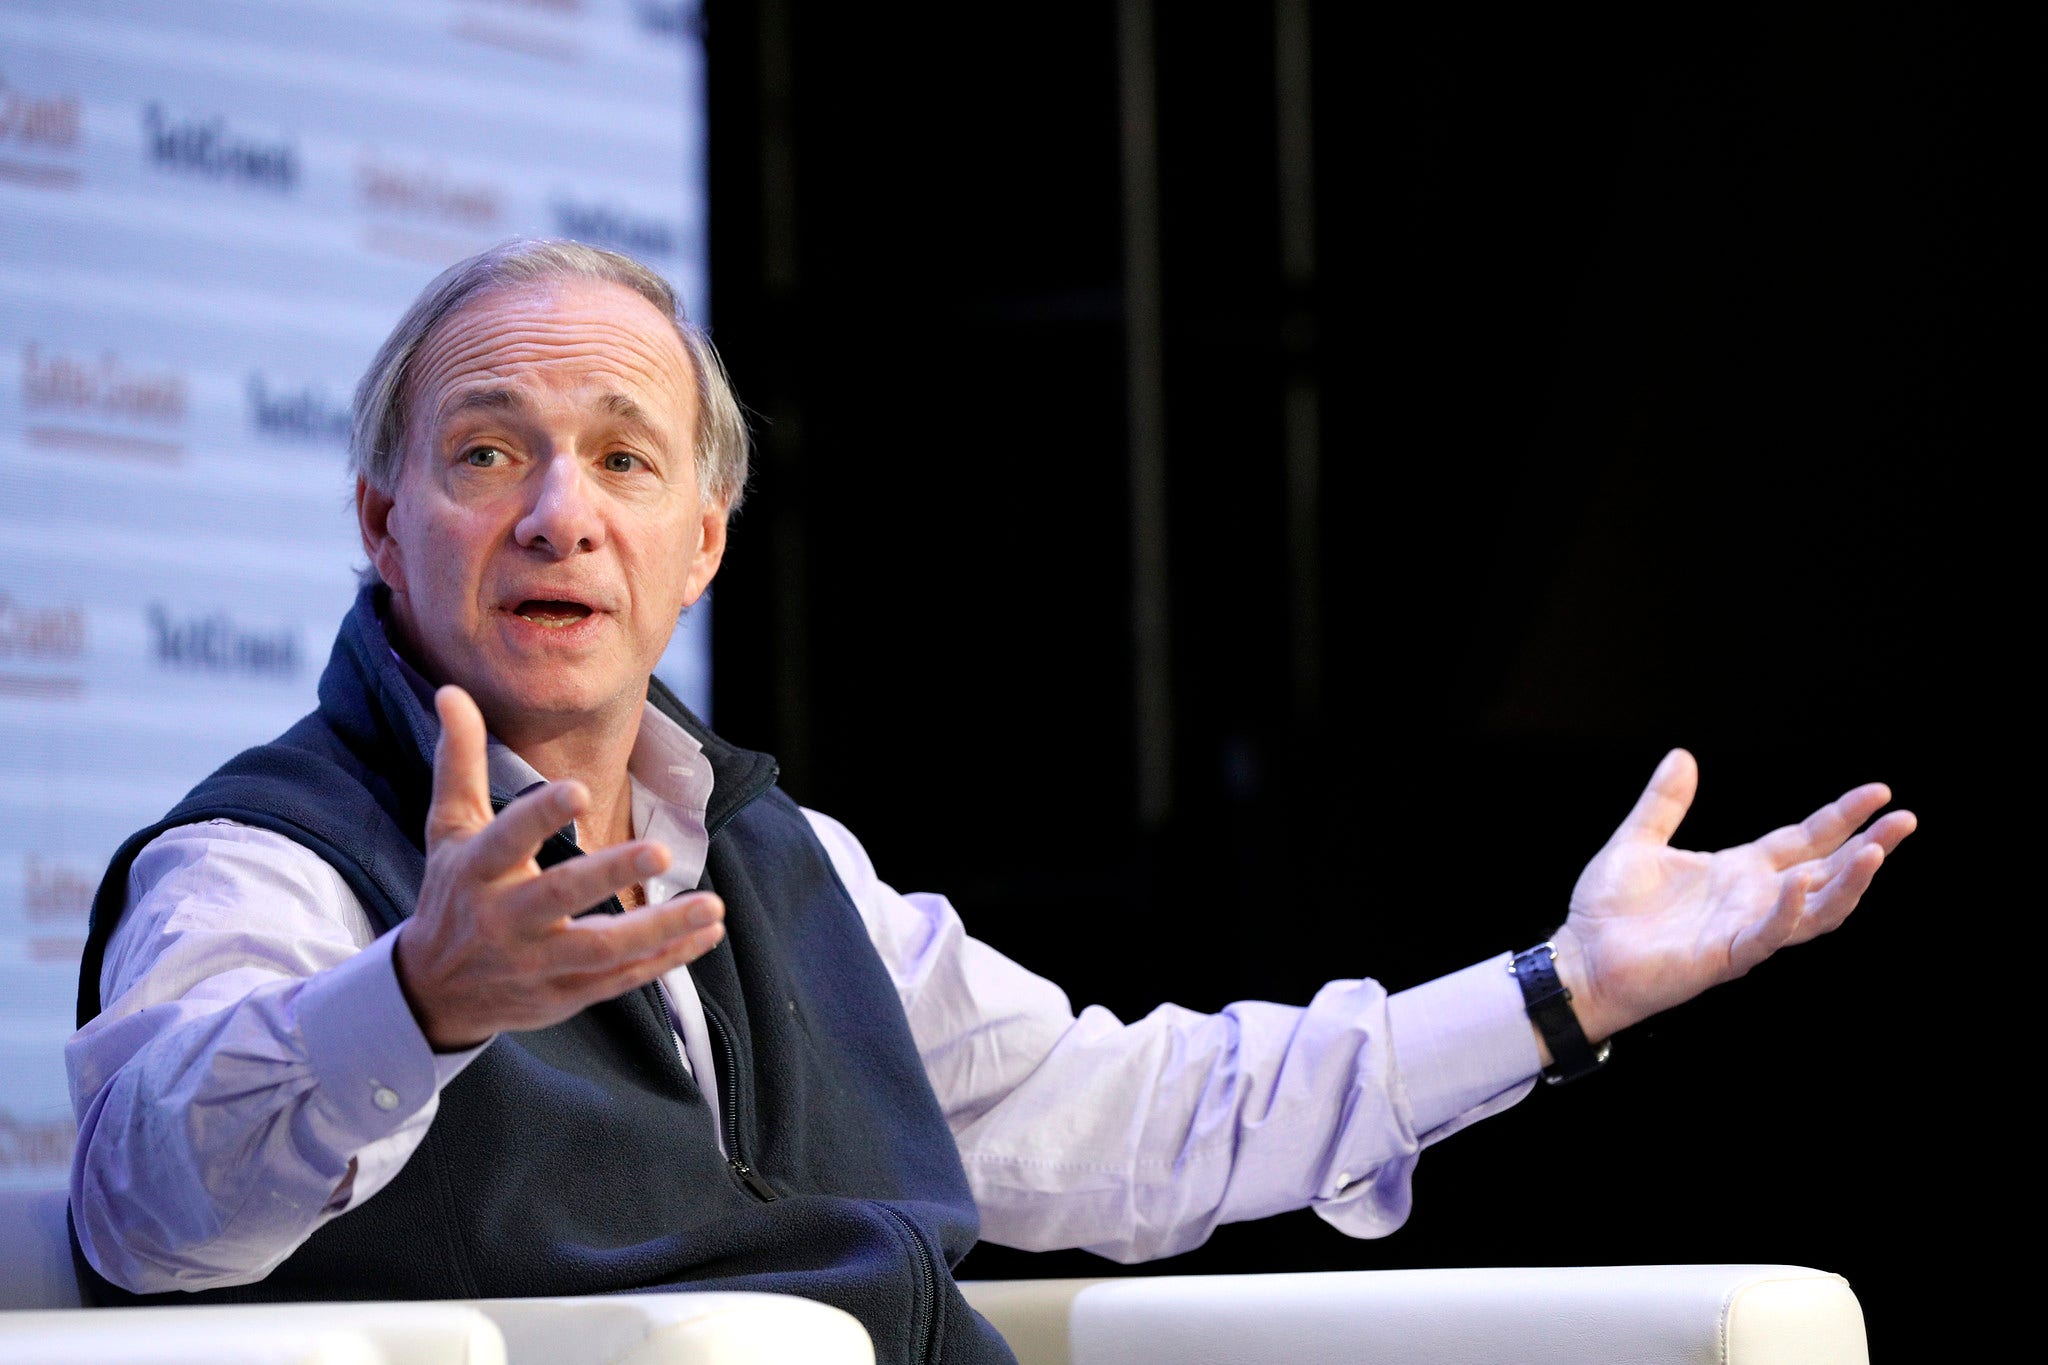 Ray Dalio Relinquishes Control Of Bridgewater: What You Need To Know